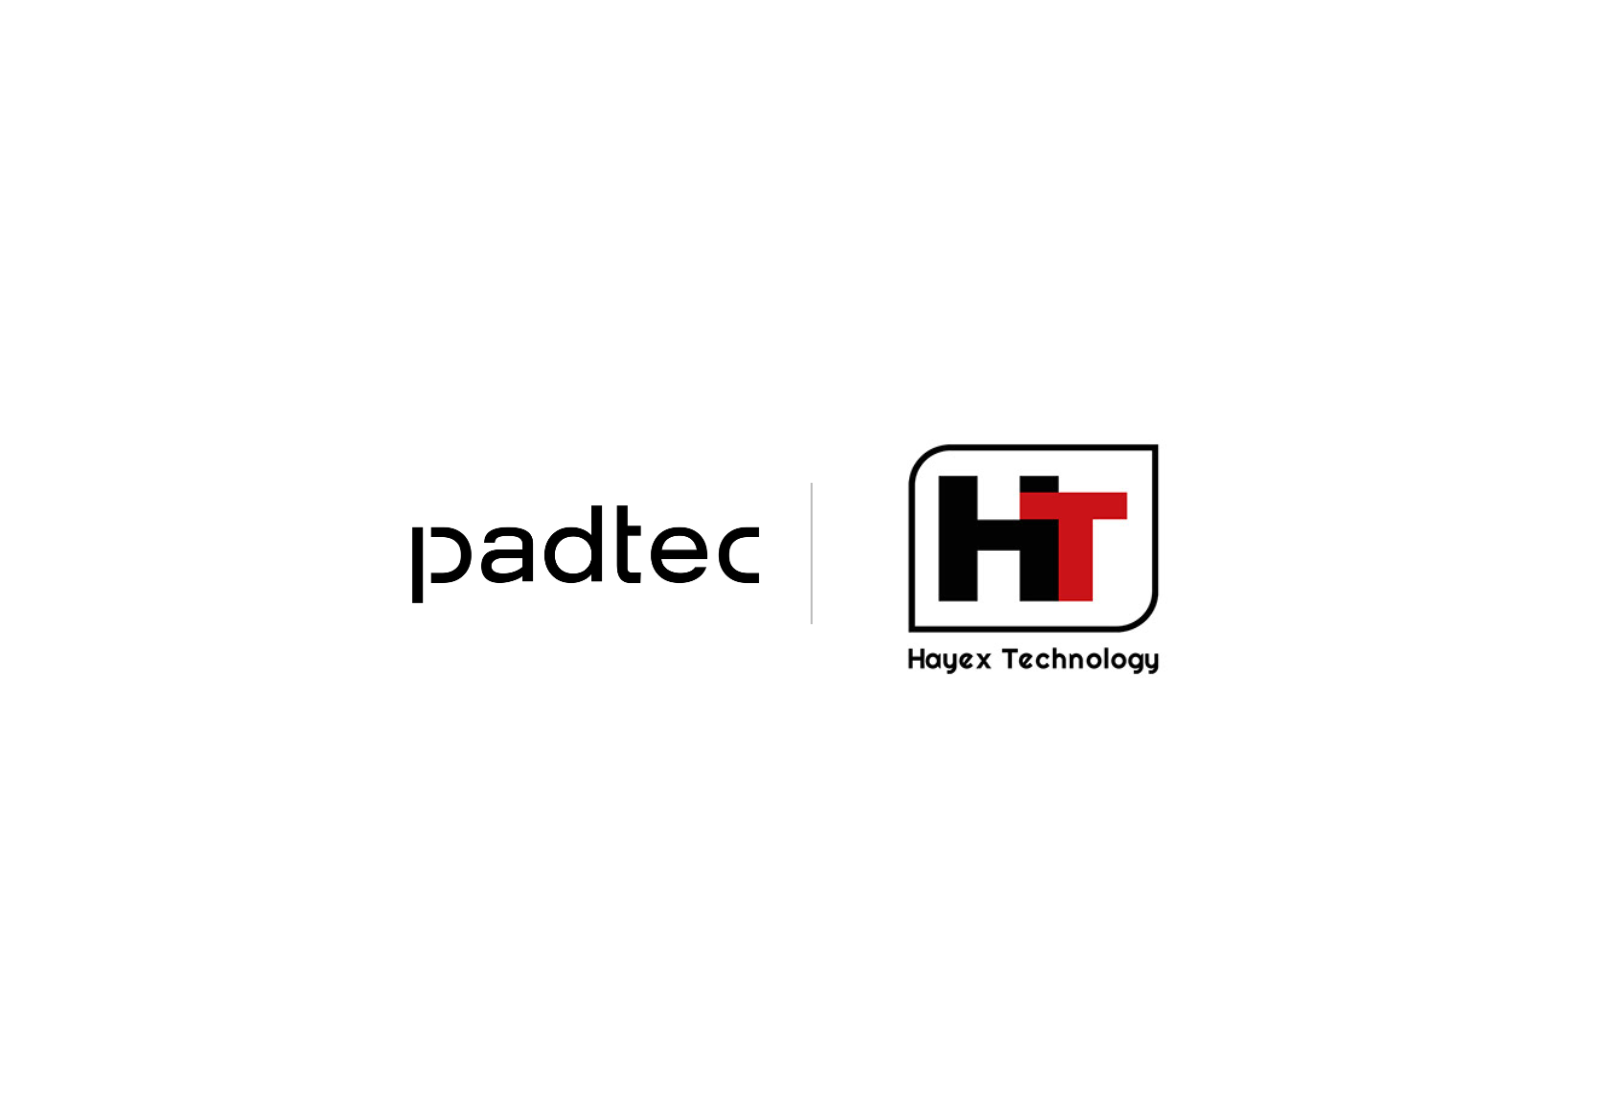 Padtec announces partnership with Hayex Technology focused on the Peruvian market